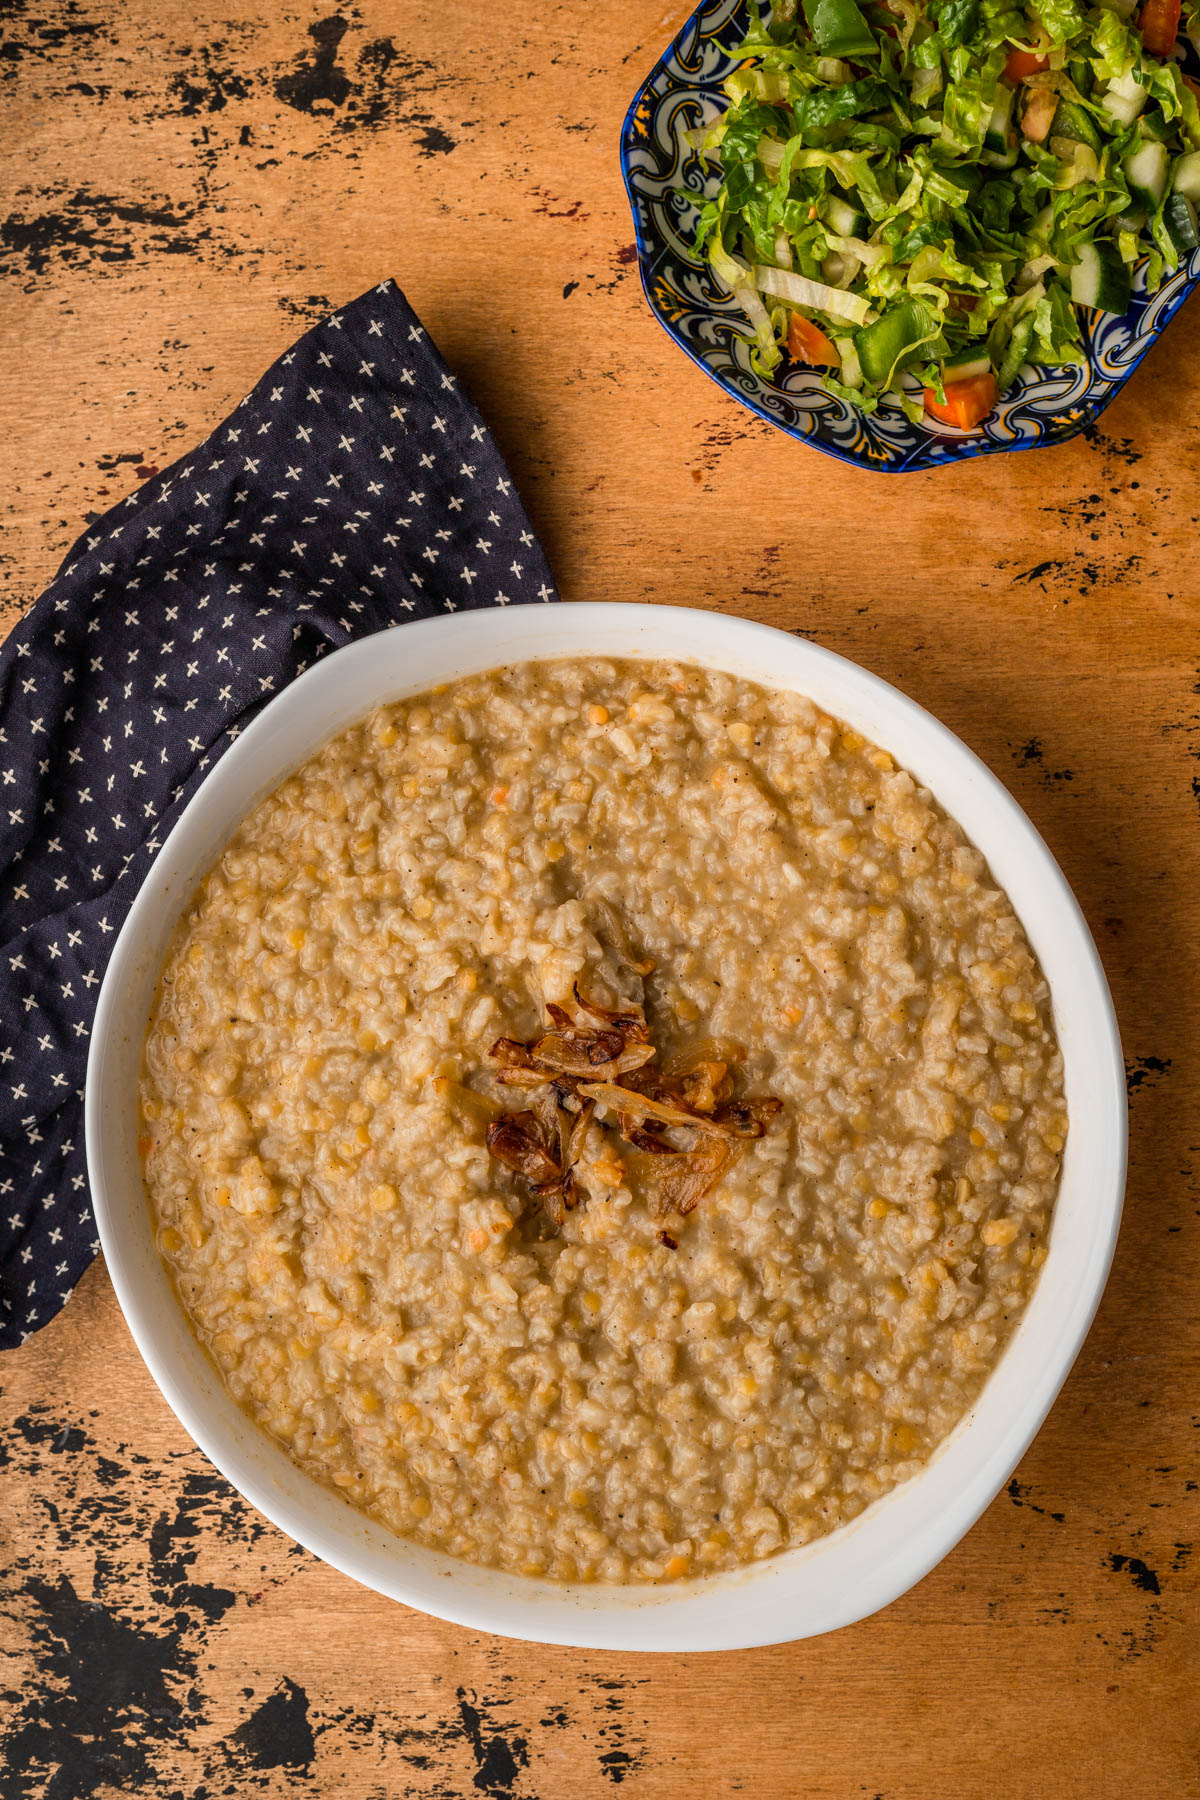 lebanese yellow lentils in a white bowl with a kitchen towel.